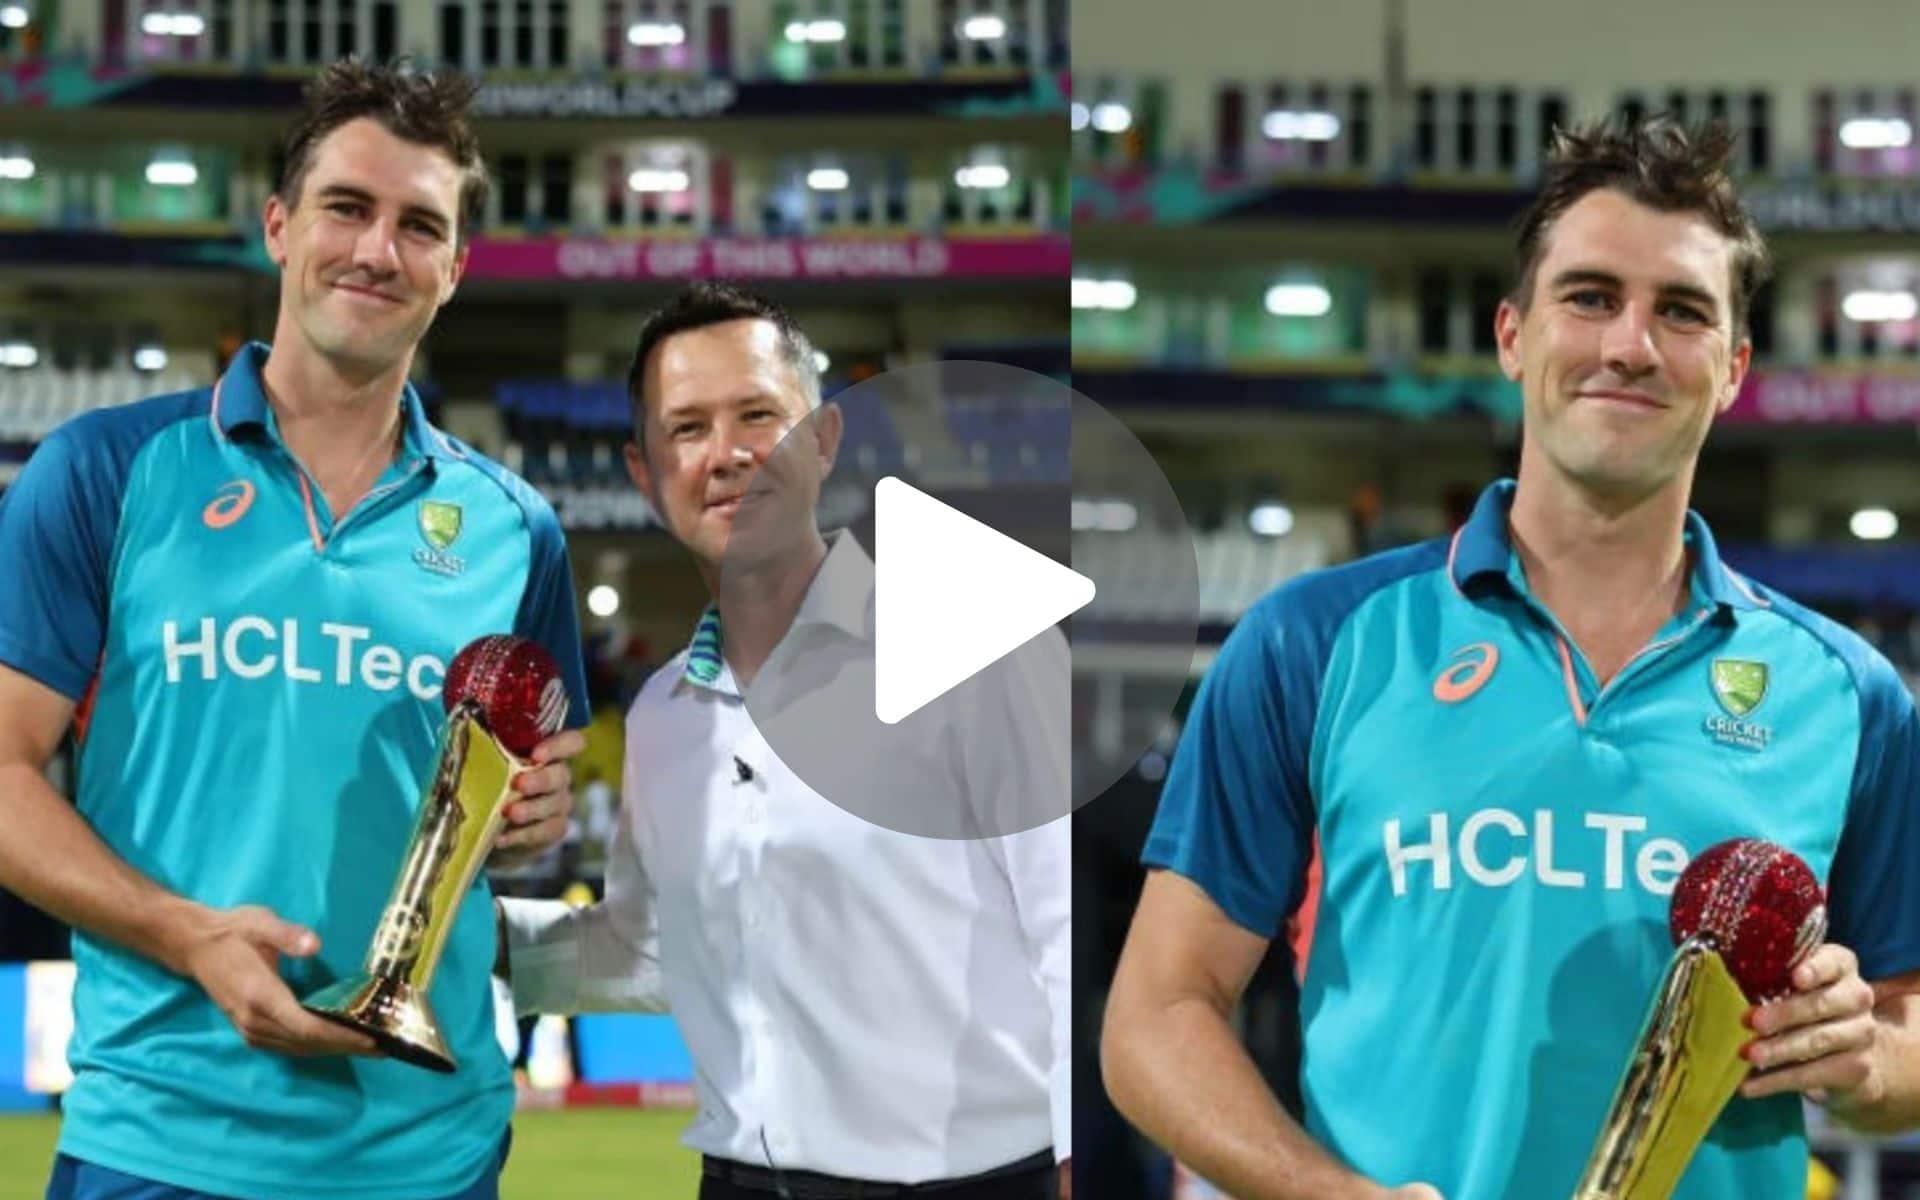 [Watch] Pat Cummins Receives The 'ICC Player Of The Year' Award From Ricky Ponting